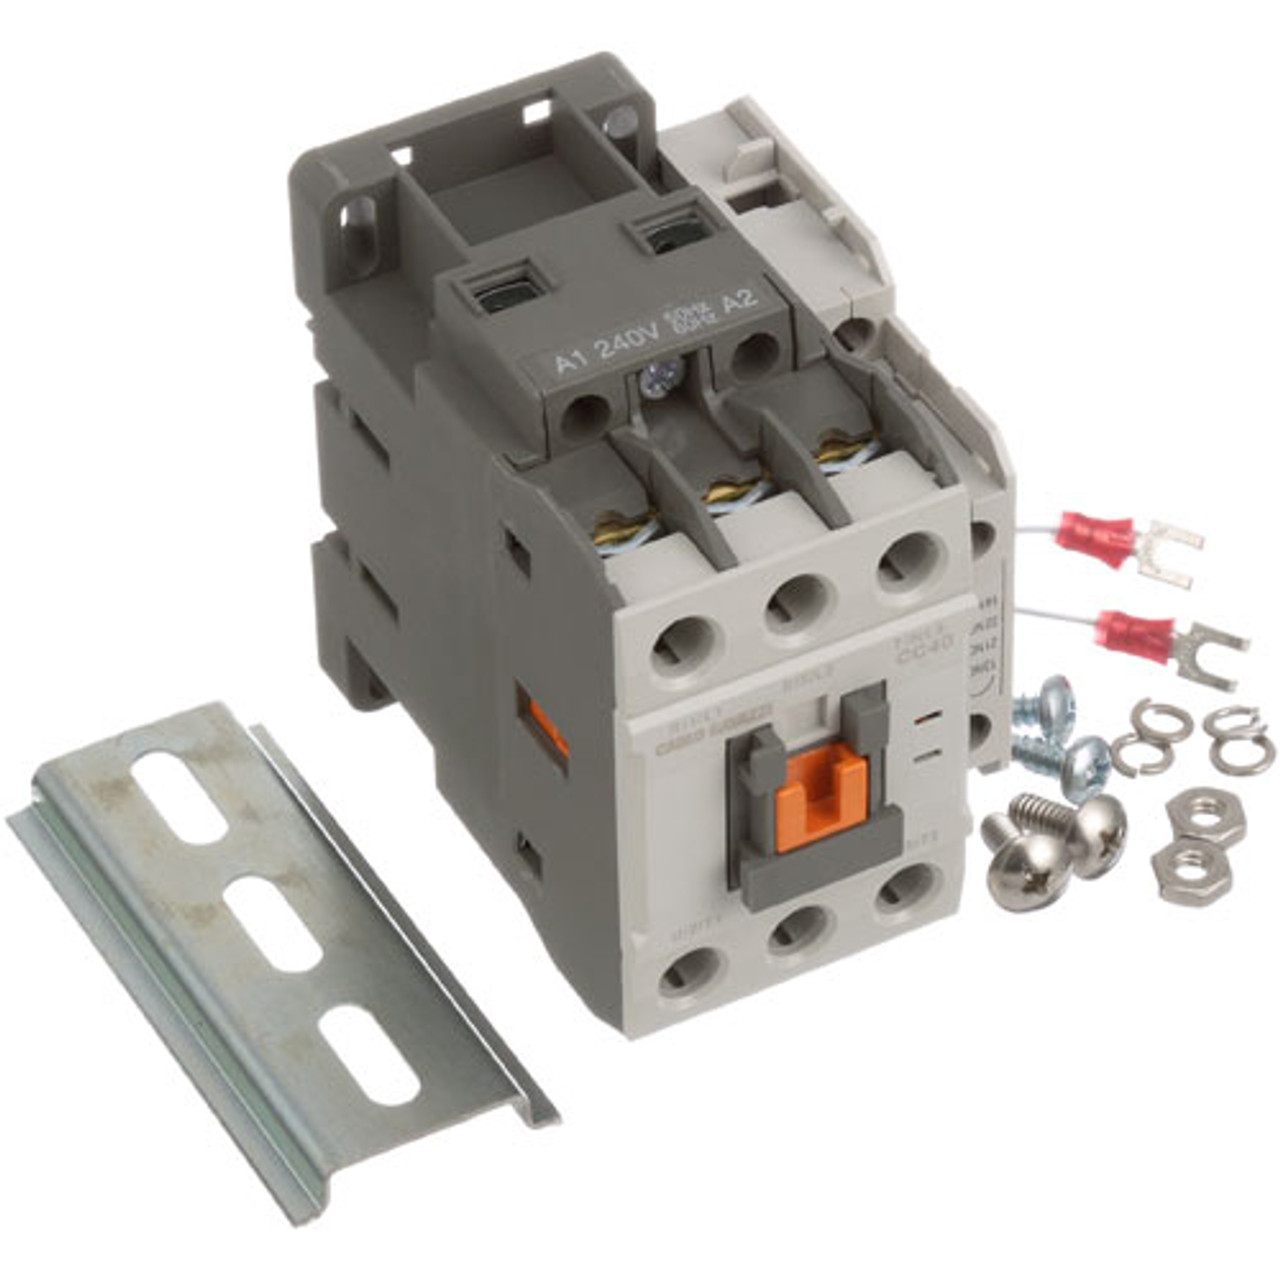 Contactor - Replacement Part For Blodgett 37295